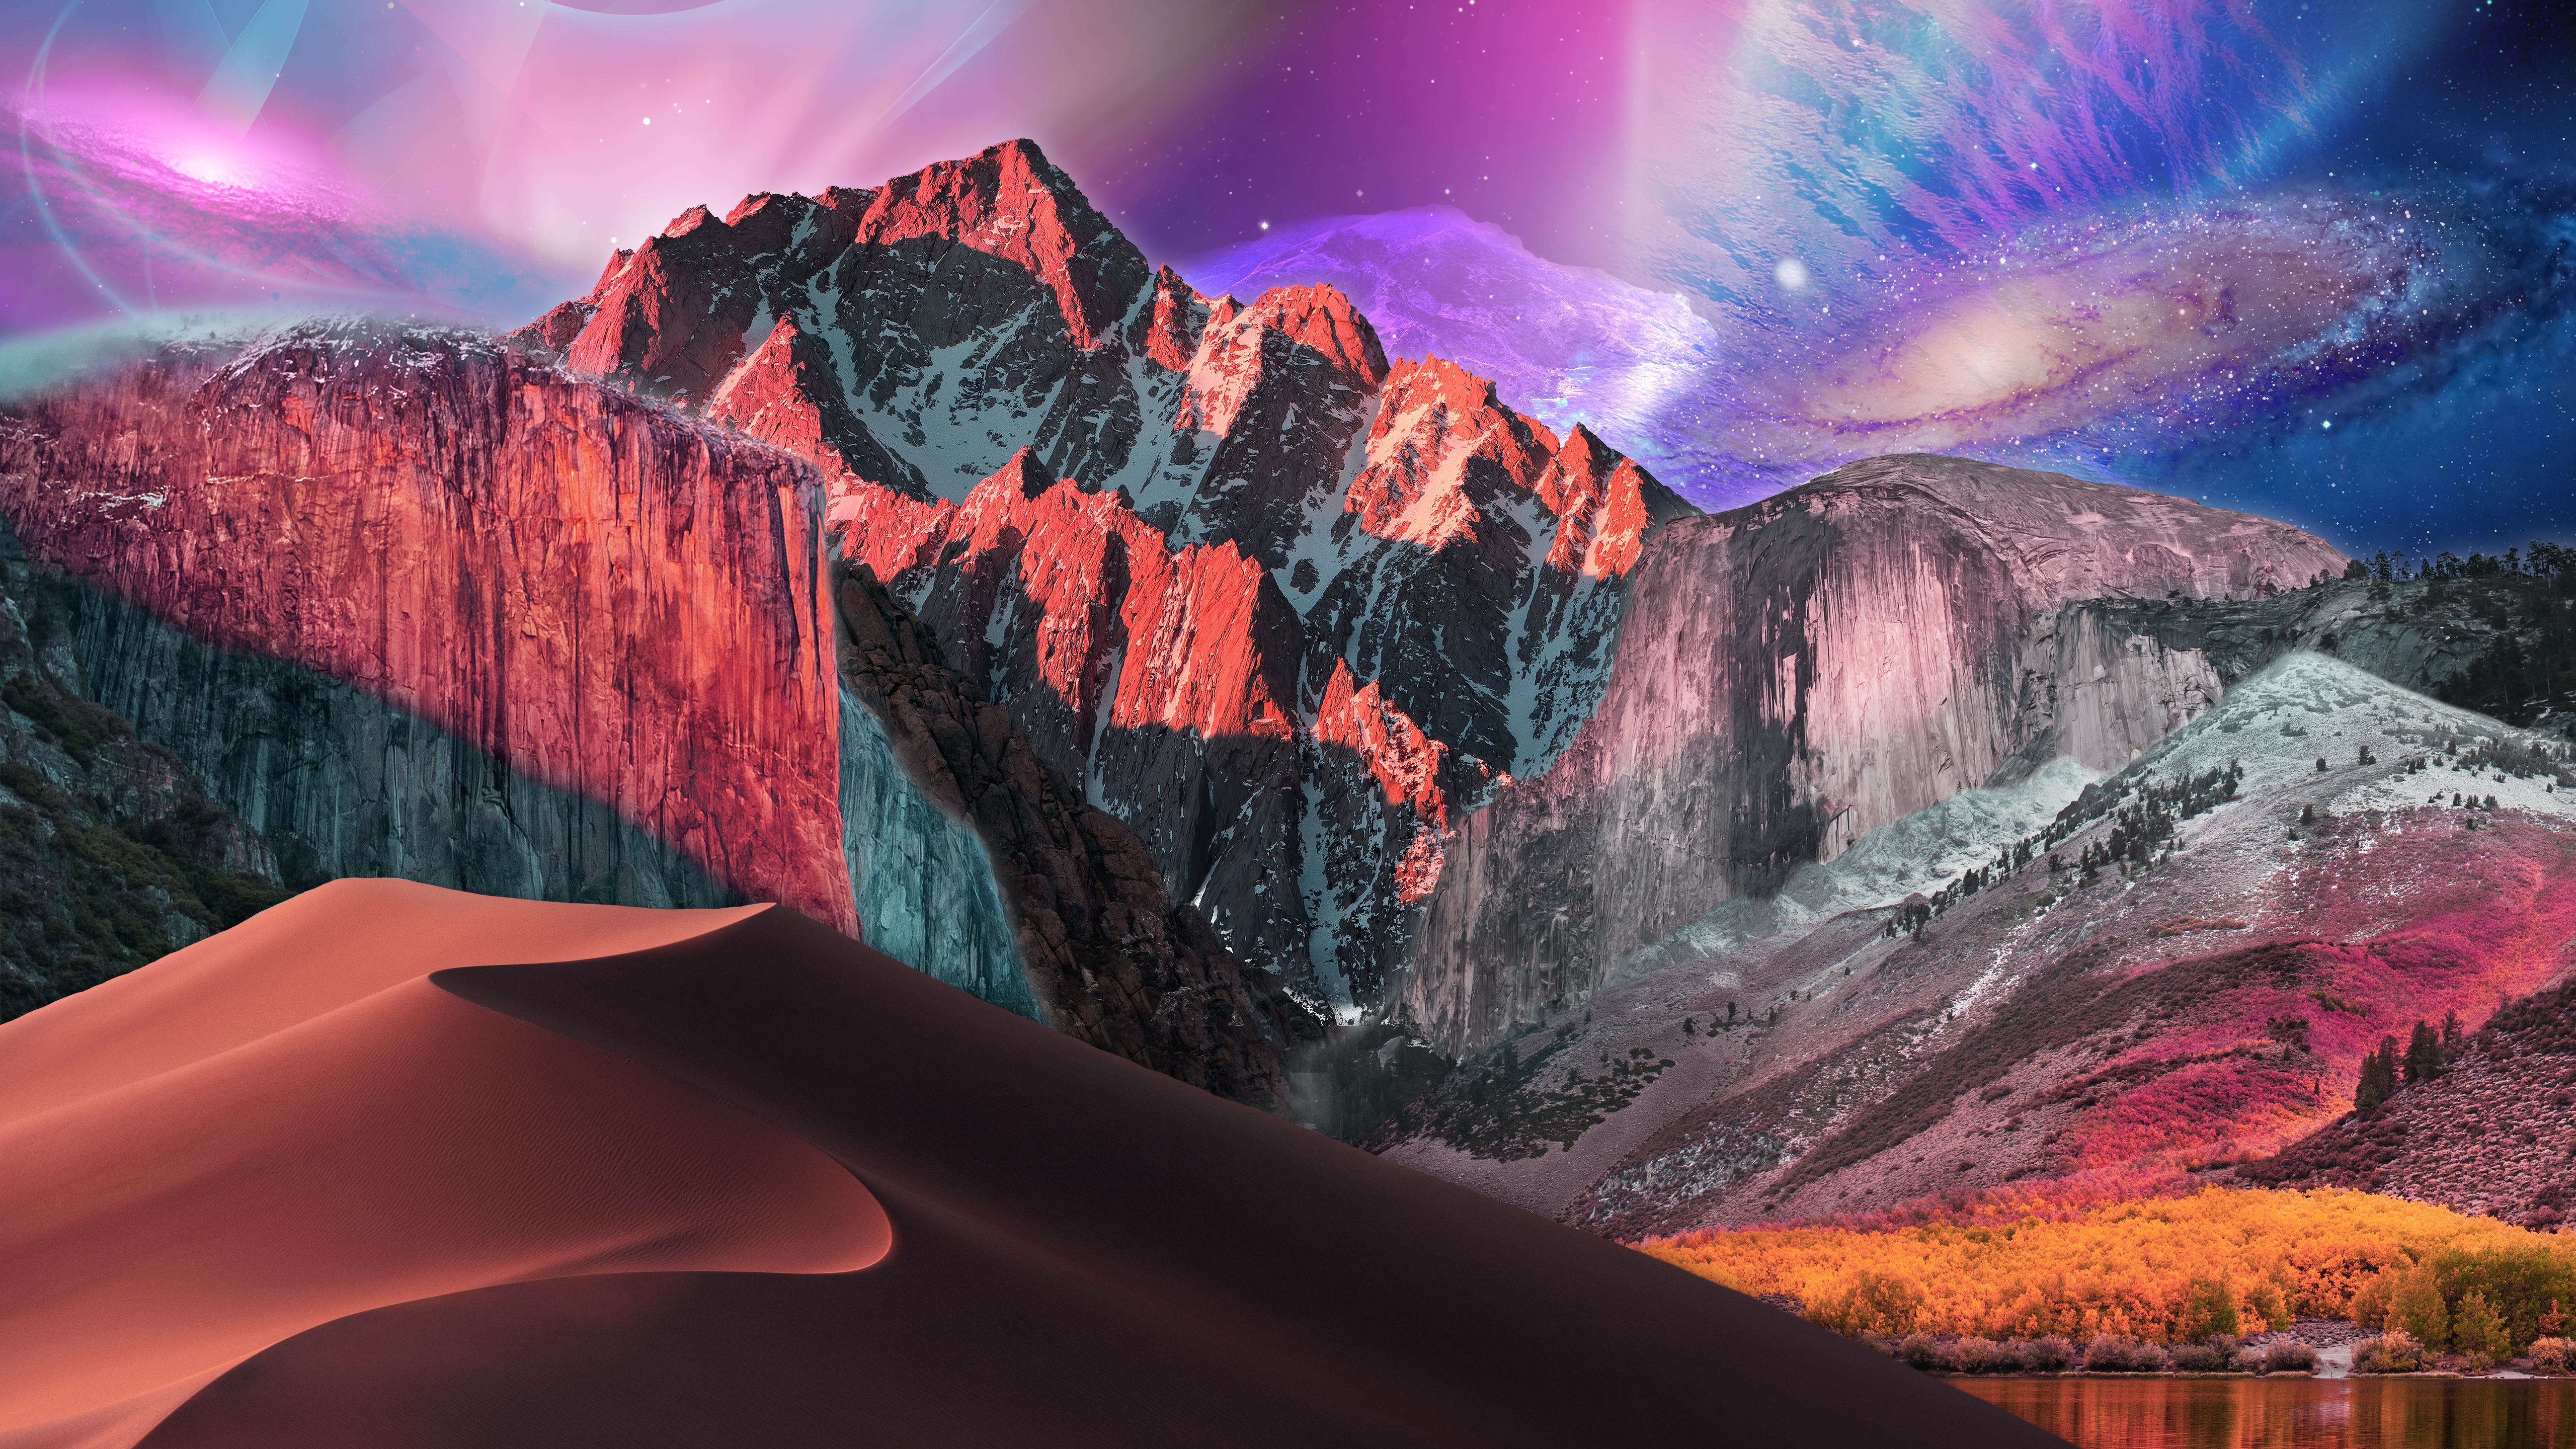 Os X Wallpaper Hd posted by Ethan Walker